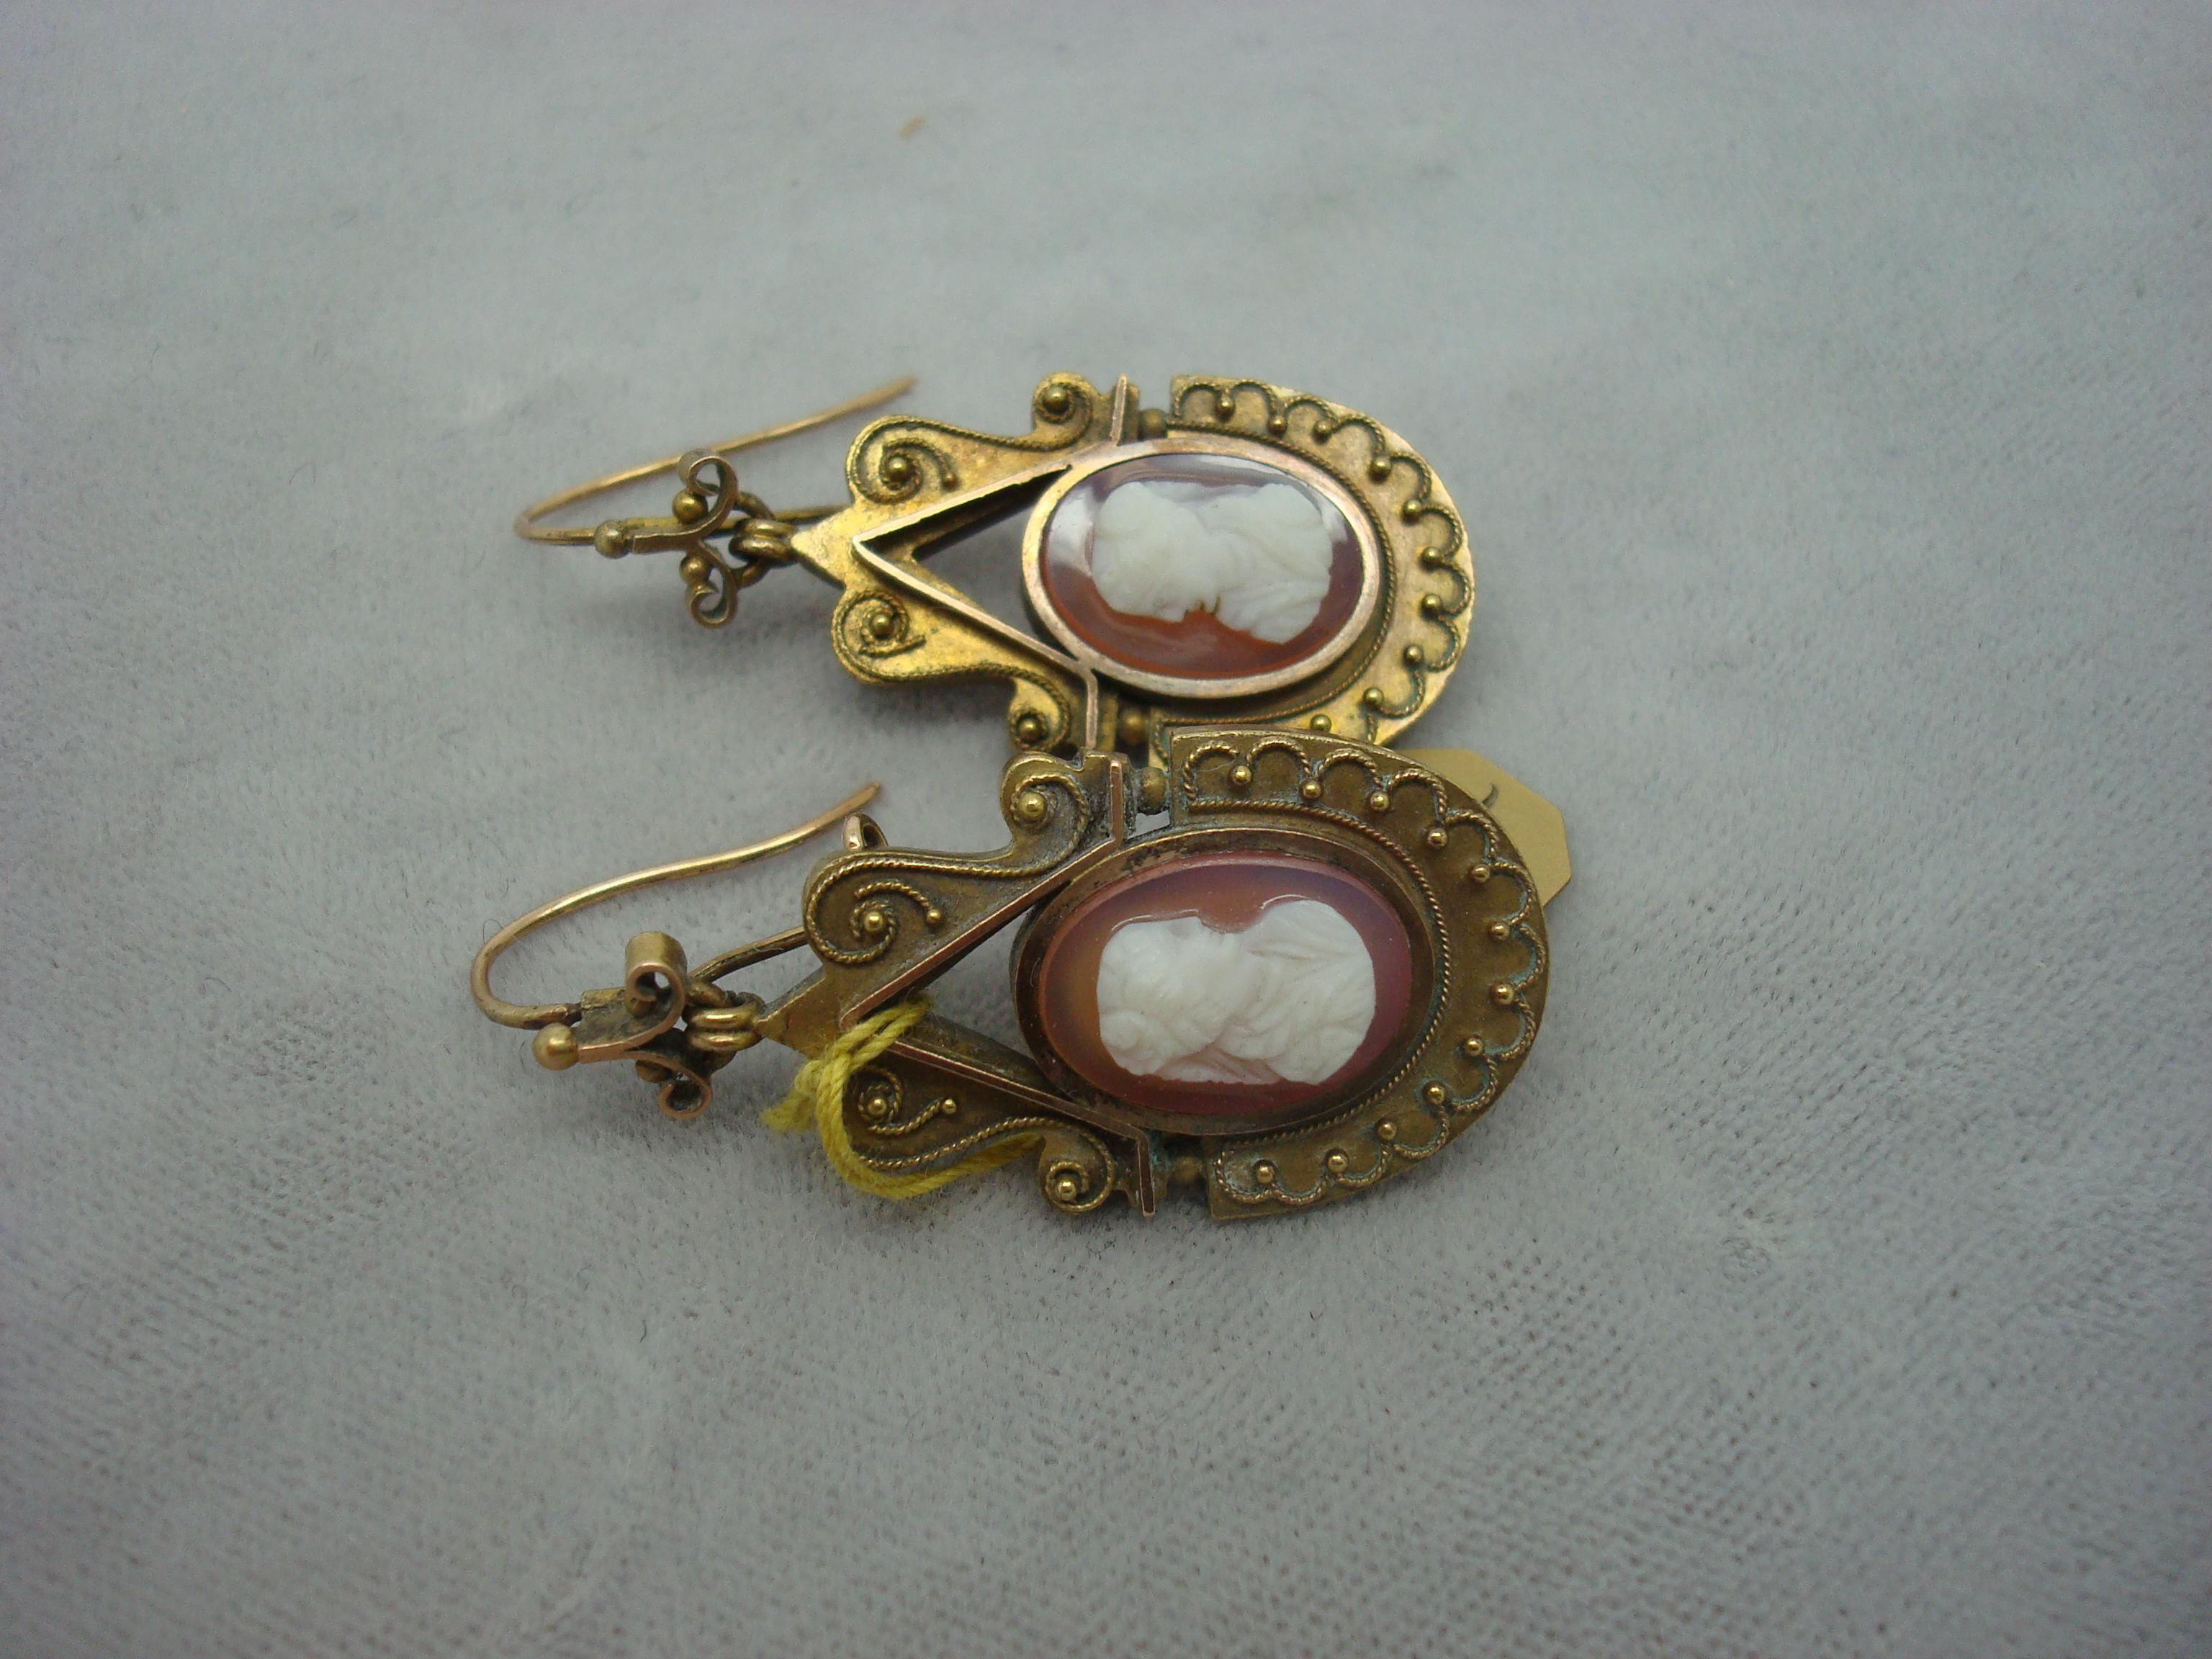 14k Gold Genuine Natural Stone Cameo Pendant and Earrings Set '#1040' 2